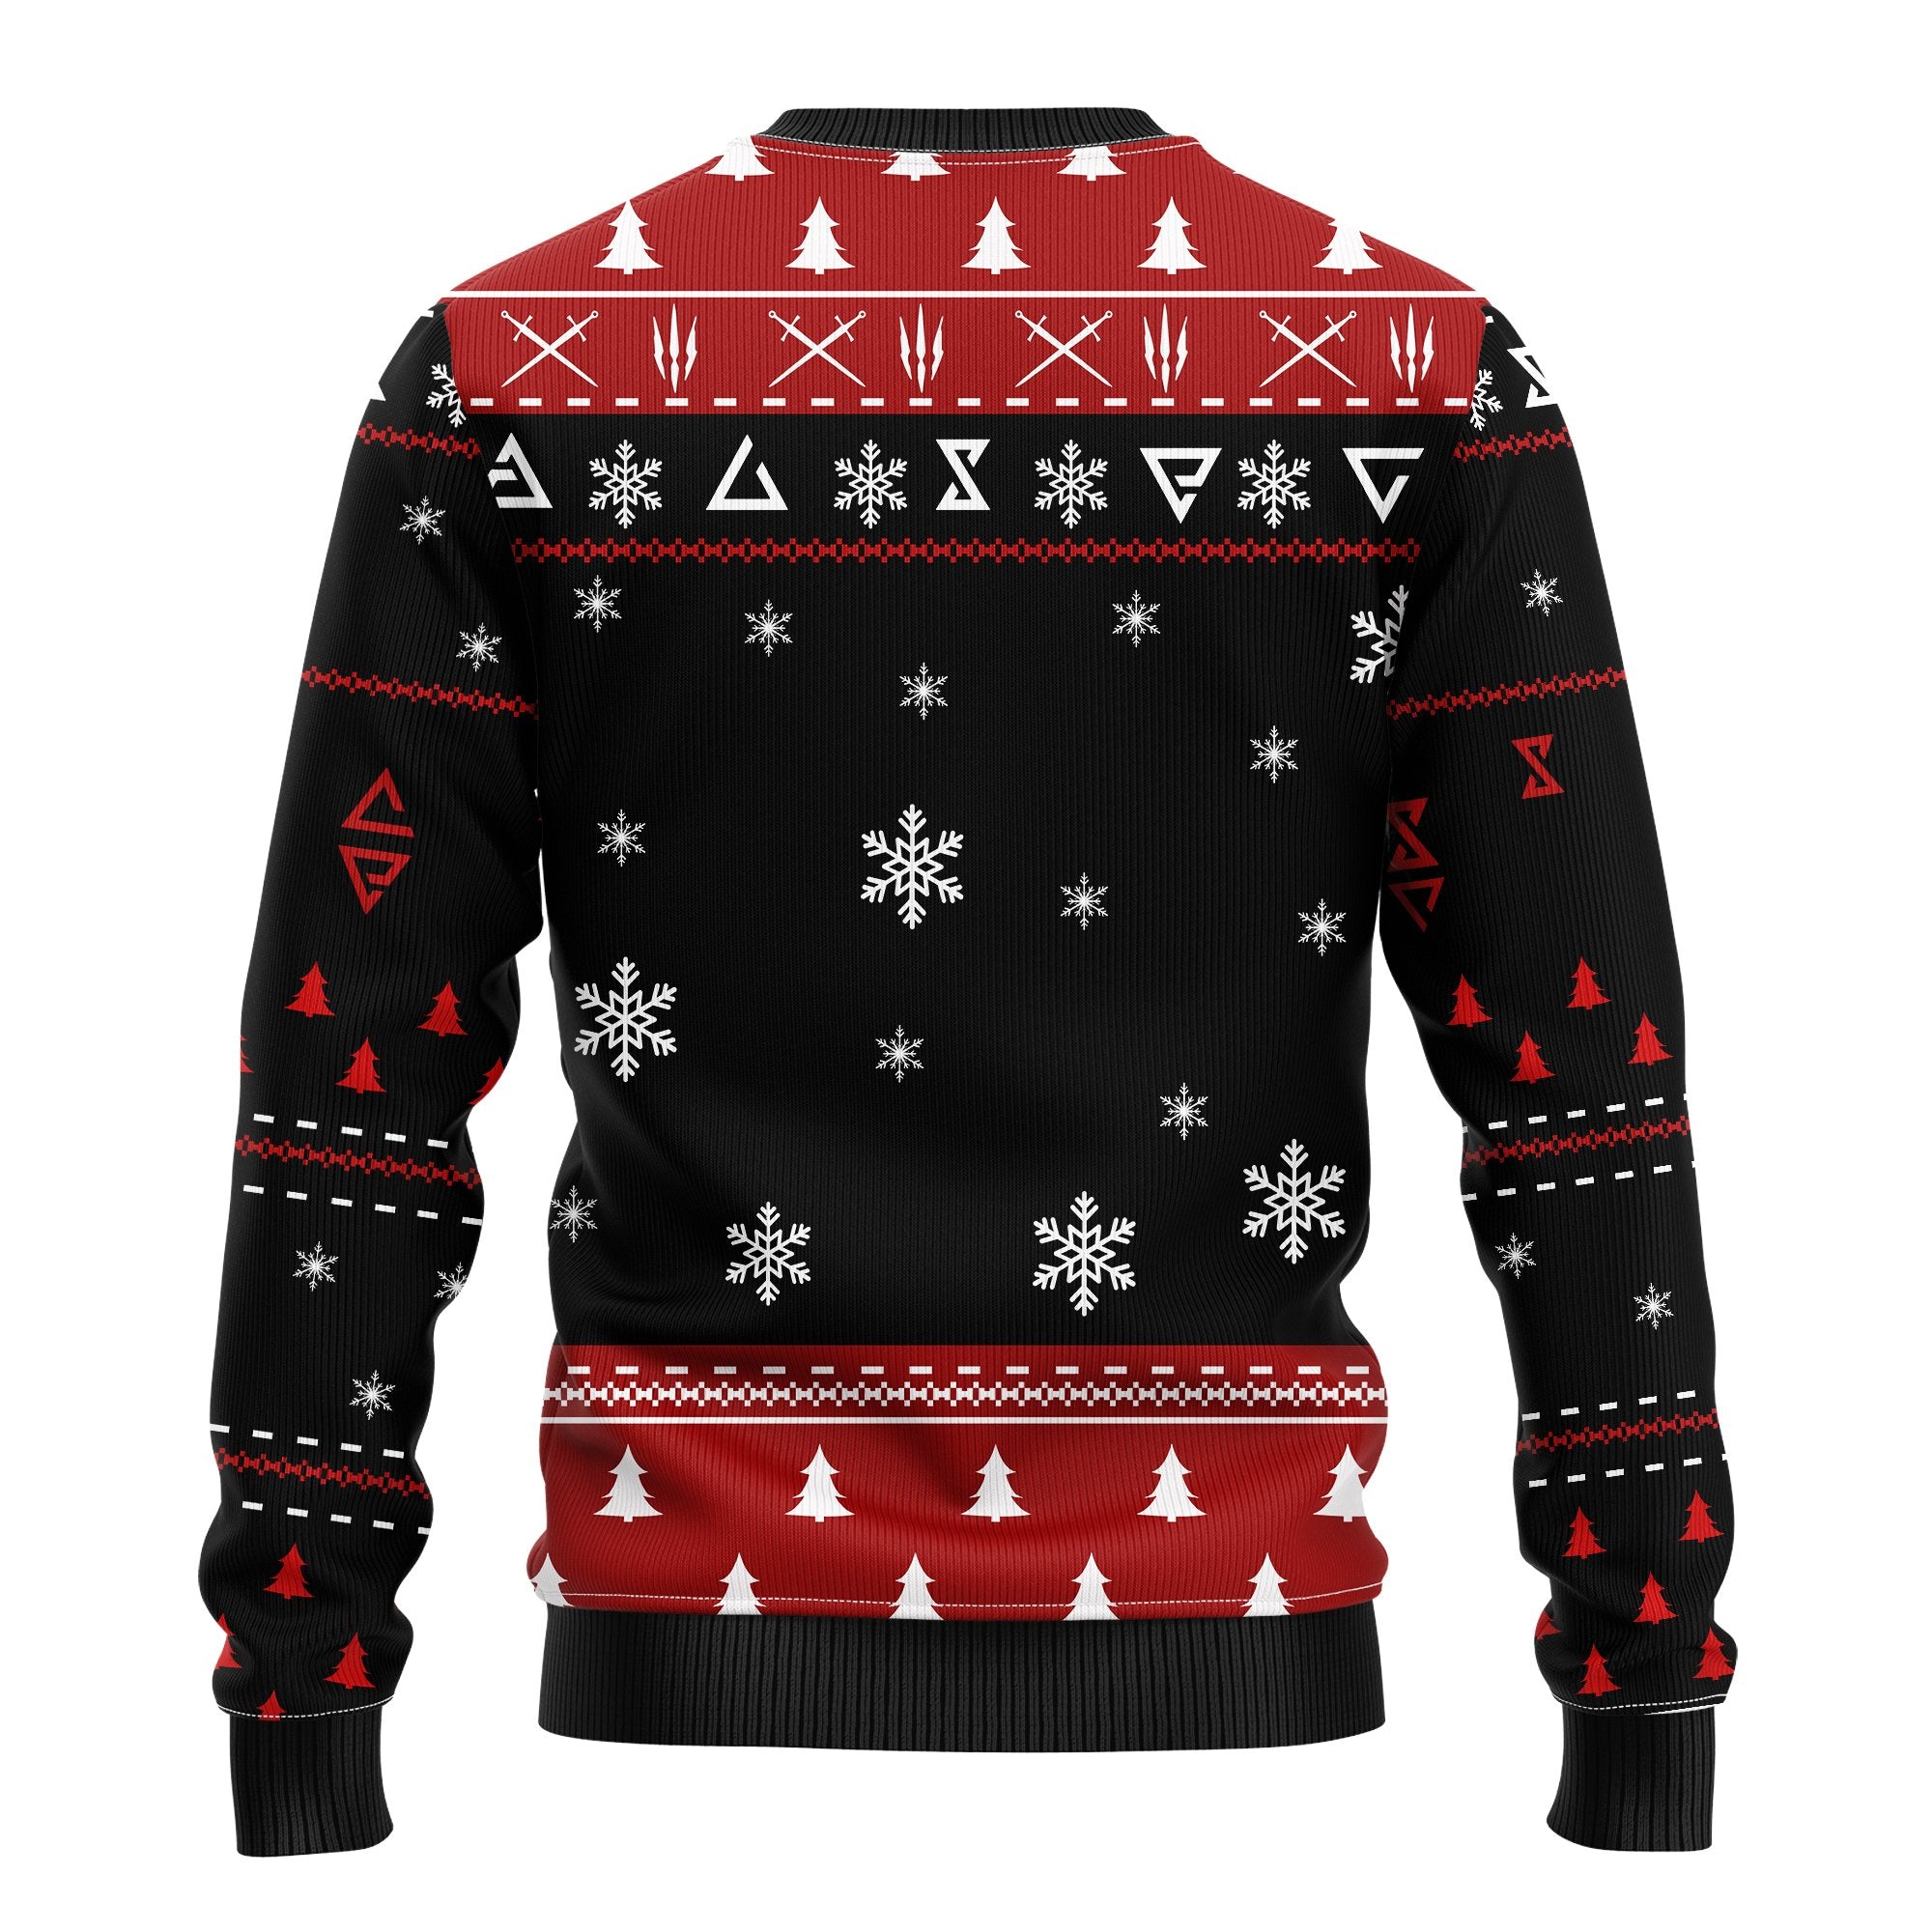 The Witcher Ugly Christmas Sweater Amazing Gift Idea Thanksgiving Gift